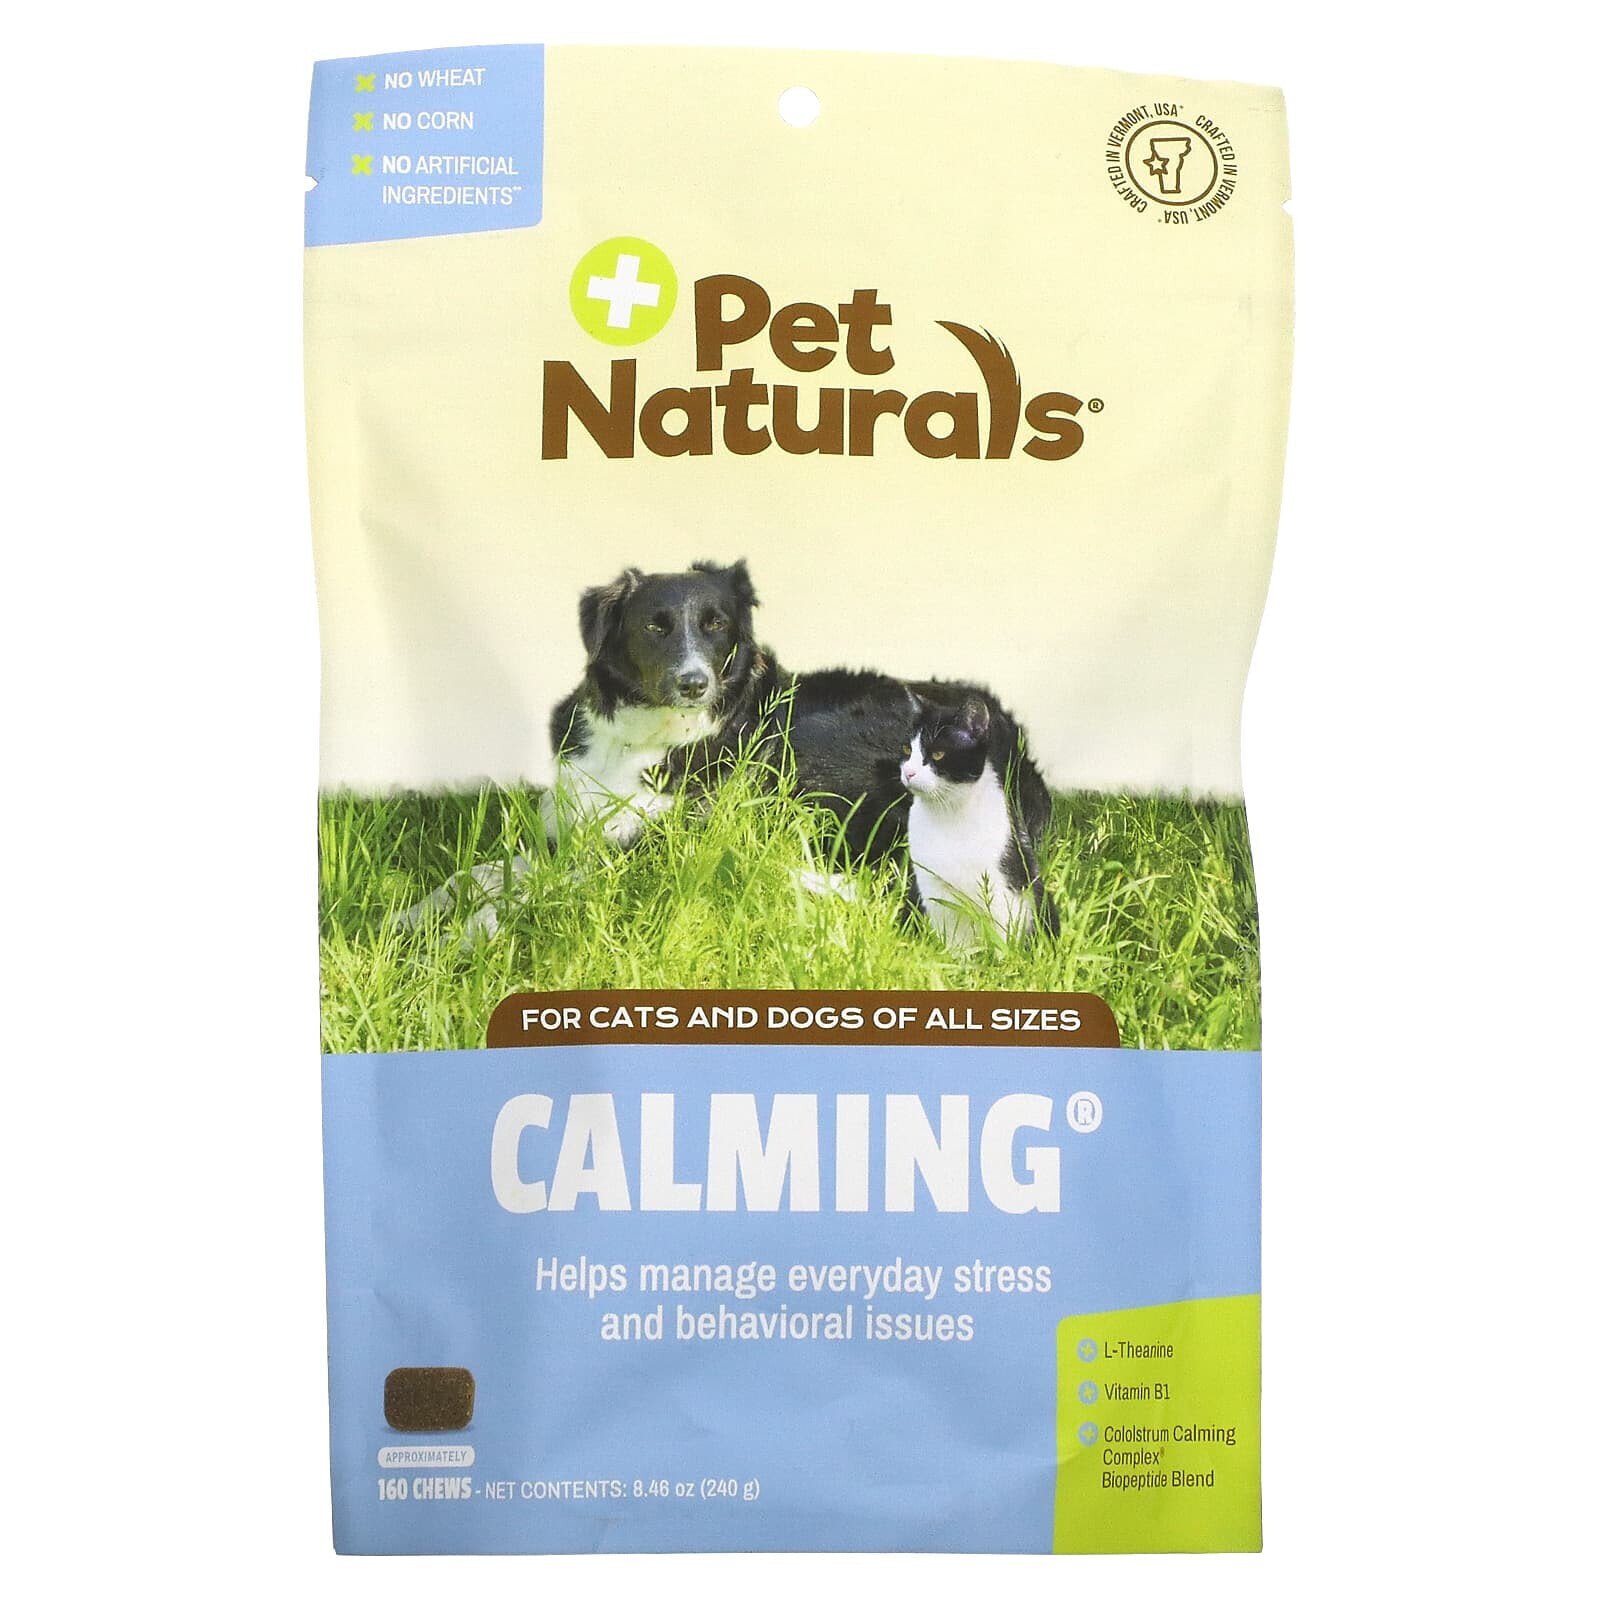 Calming, For Dogs and Cats, All Size, 160 Chews, 8.46 oz (240 g)